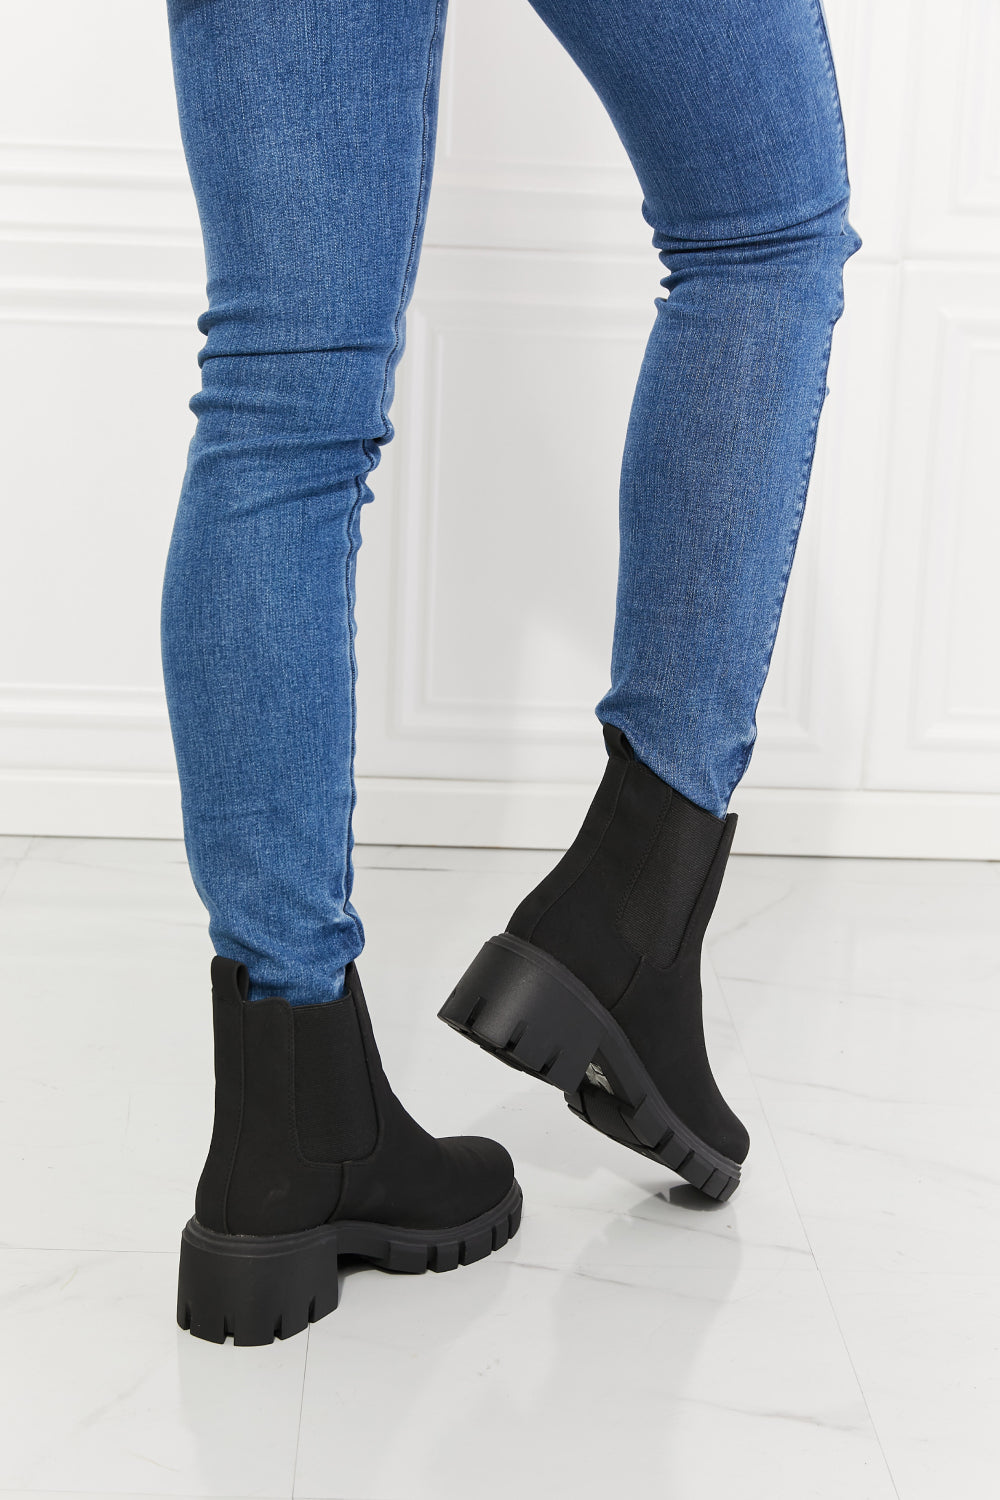 MMShoes Work For It Matte Lug Sole Chelsea Boots in Black The Stout Steer